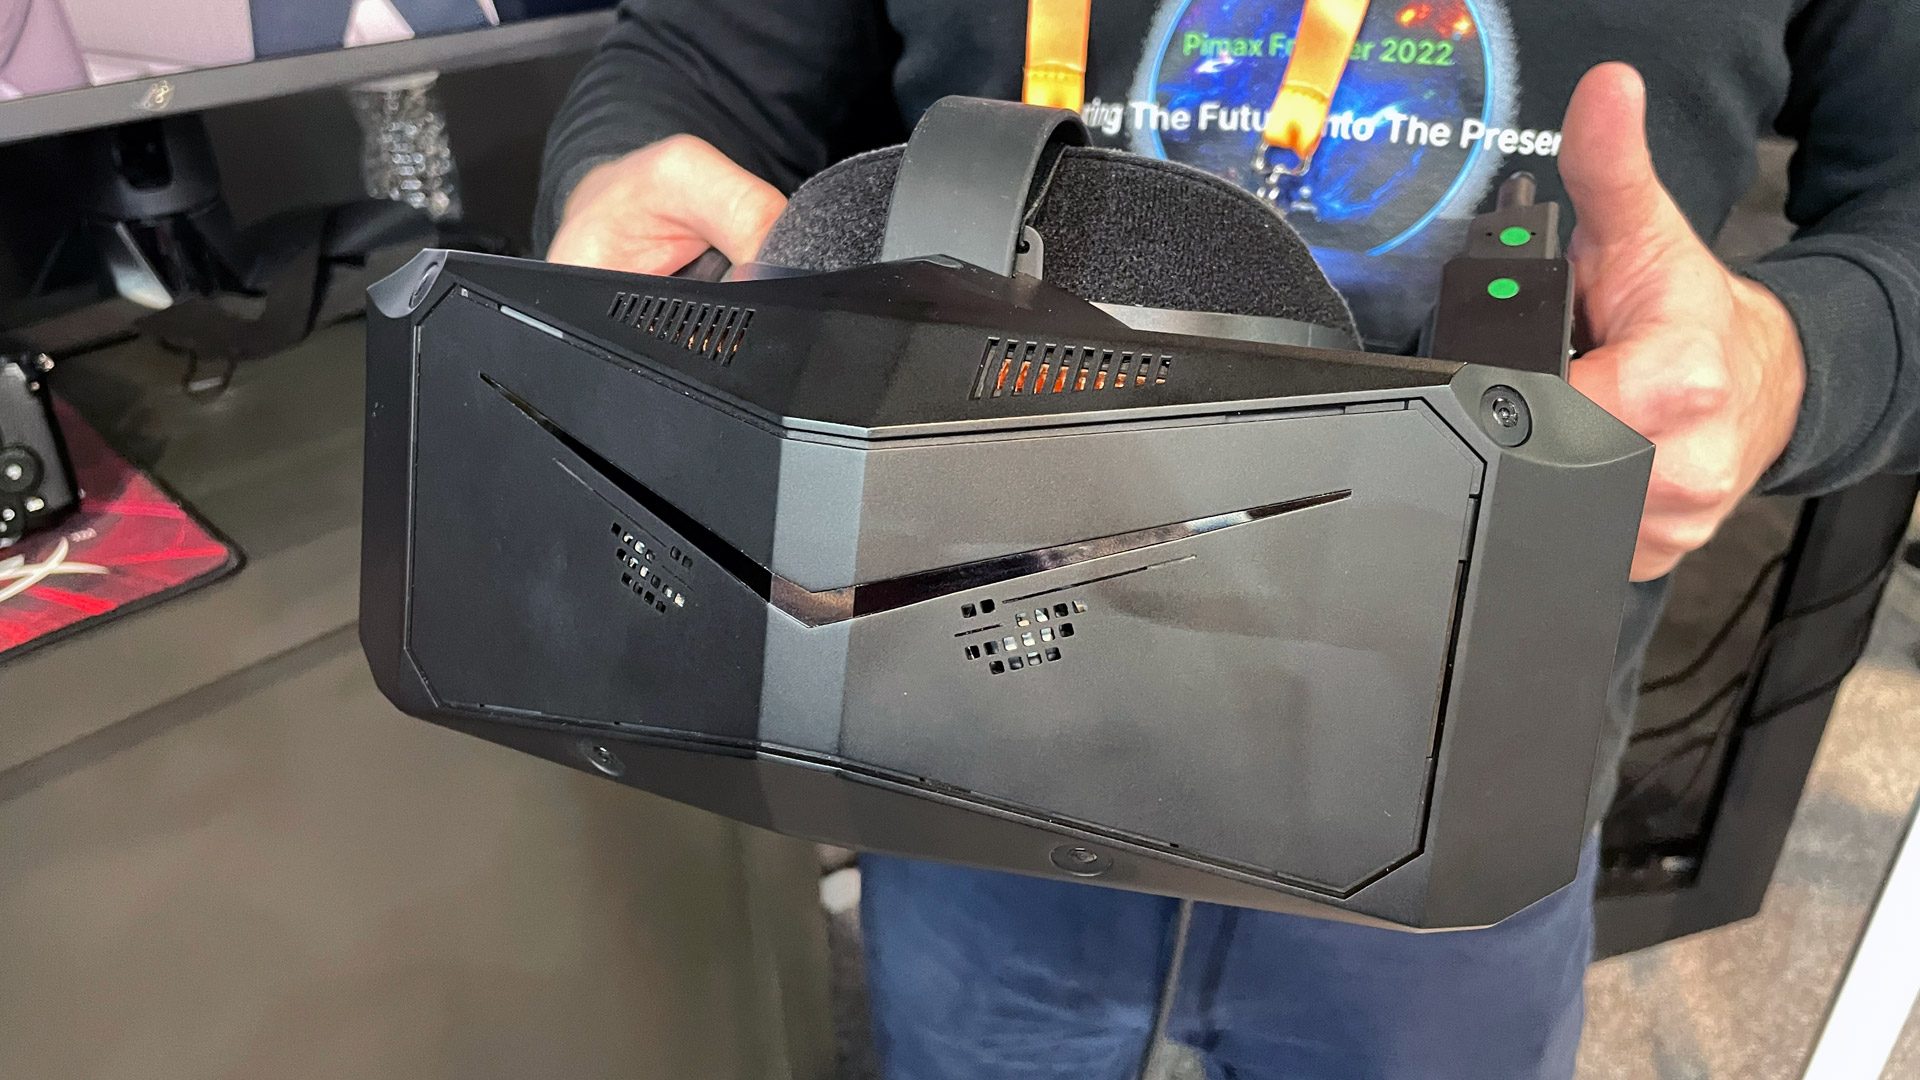 Pimax standalone VR headset Crystal will be cheaper than expected